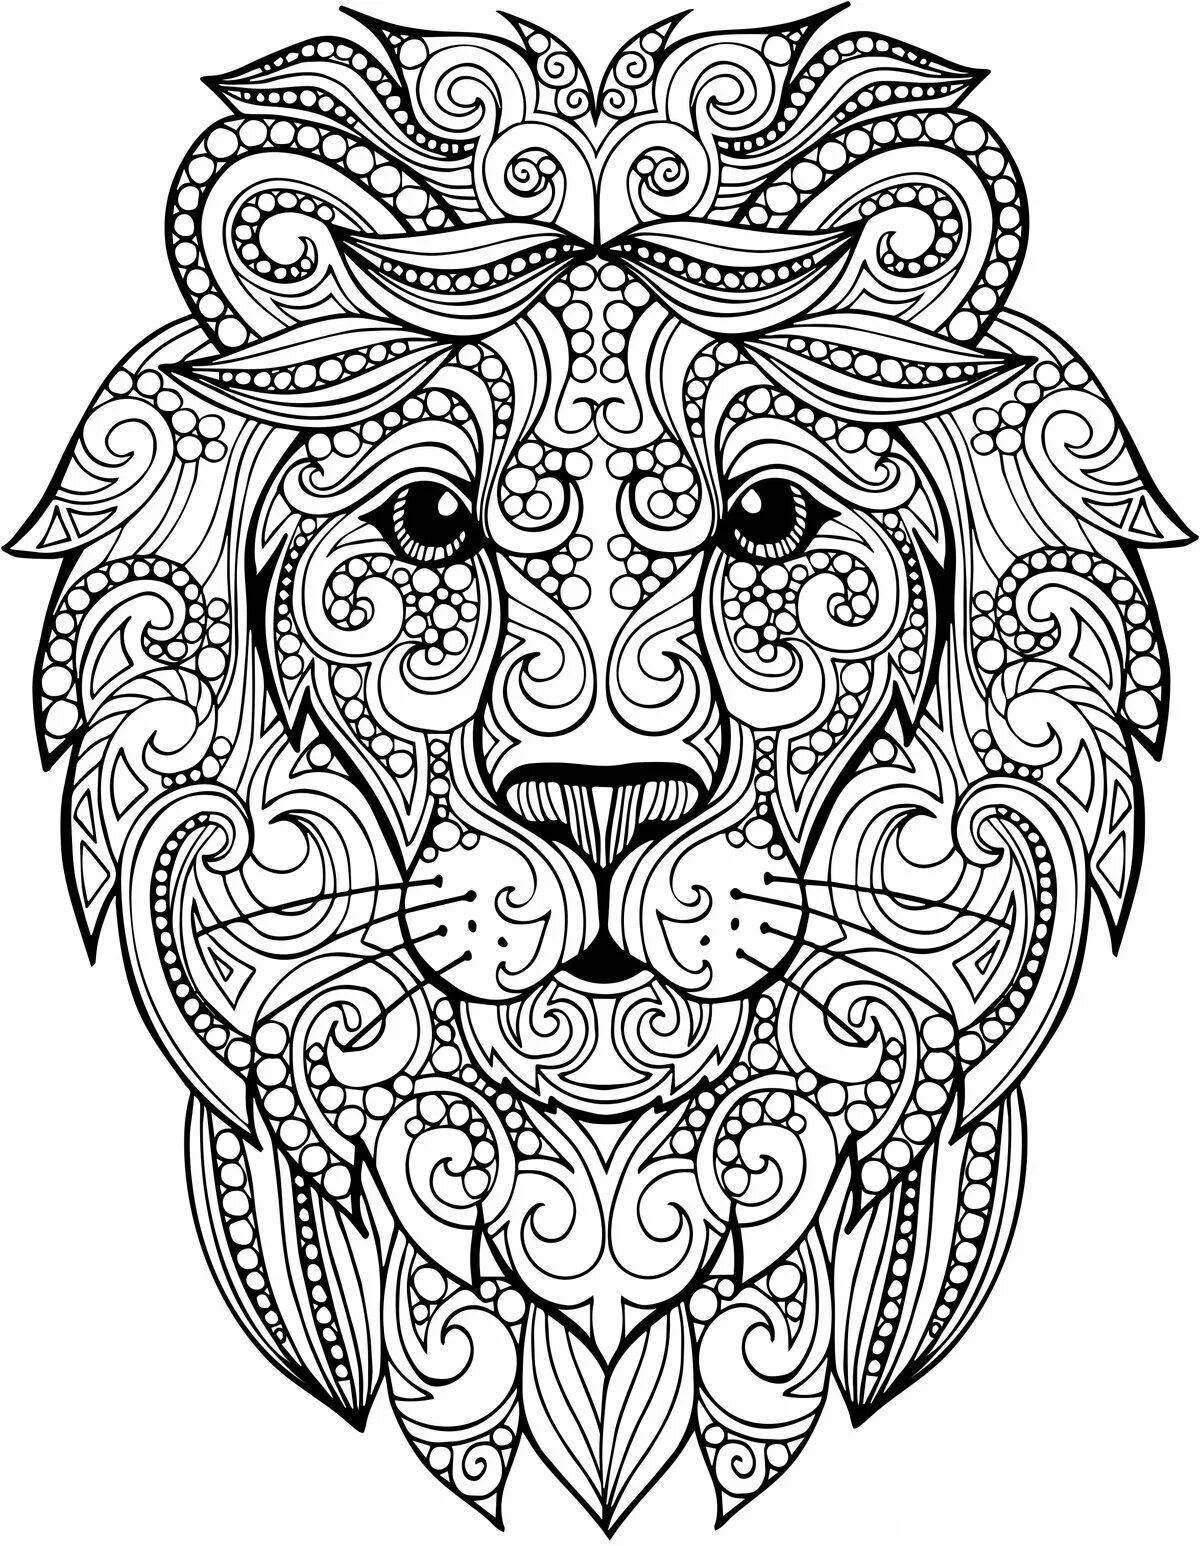 Magic anti-stress coloring book for adults